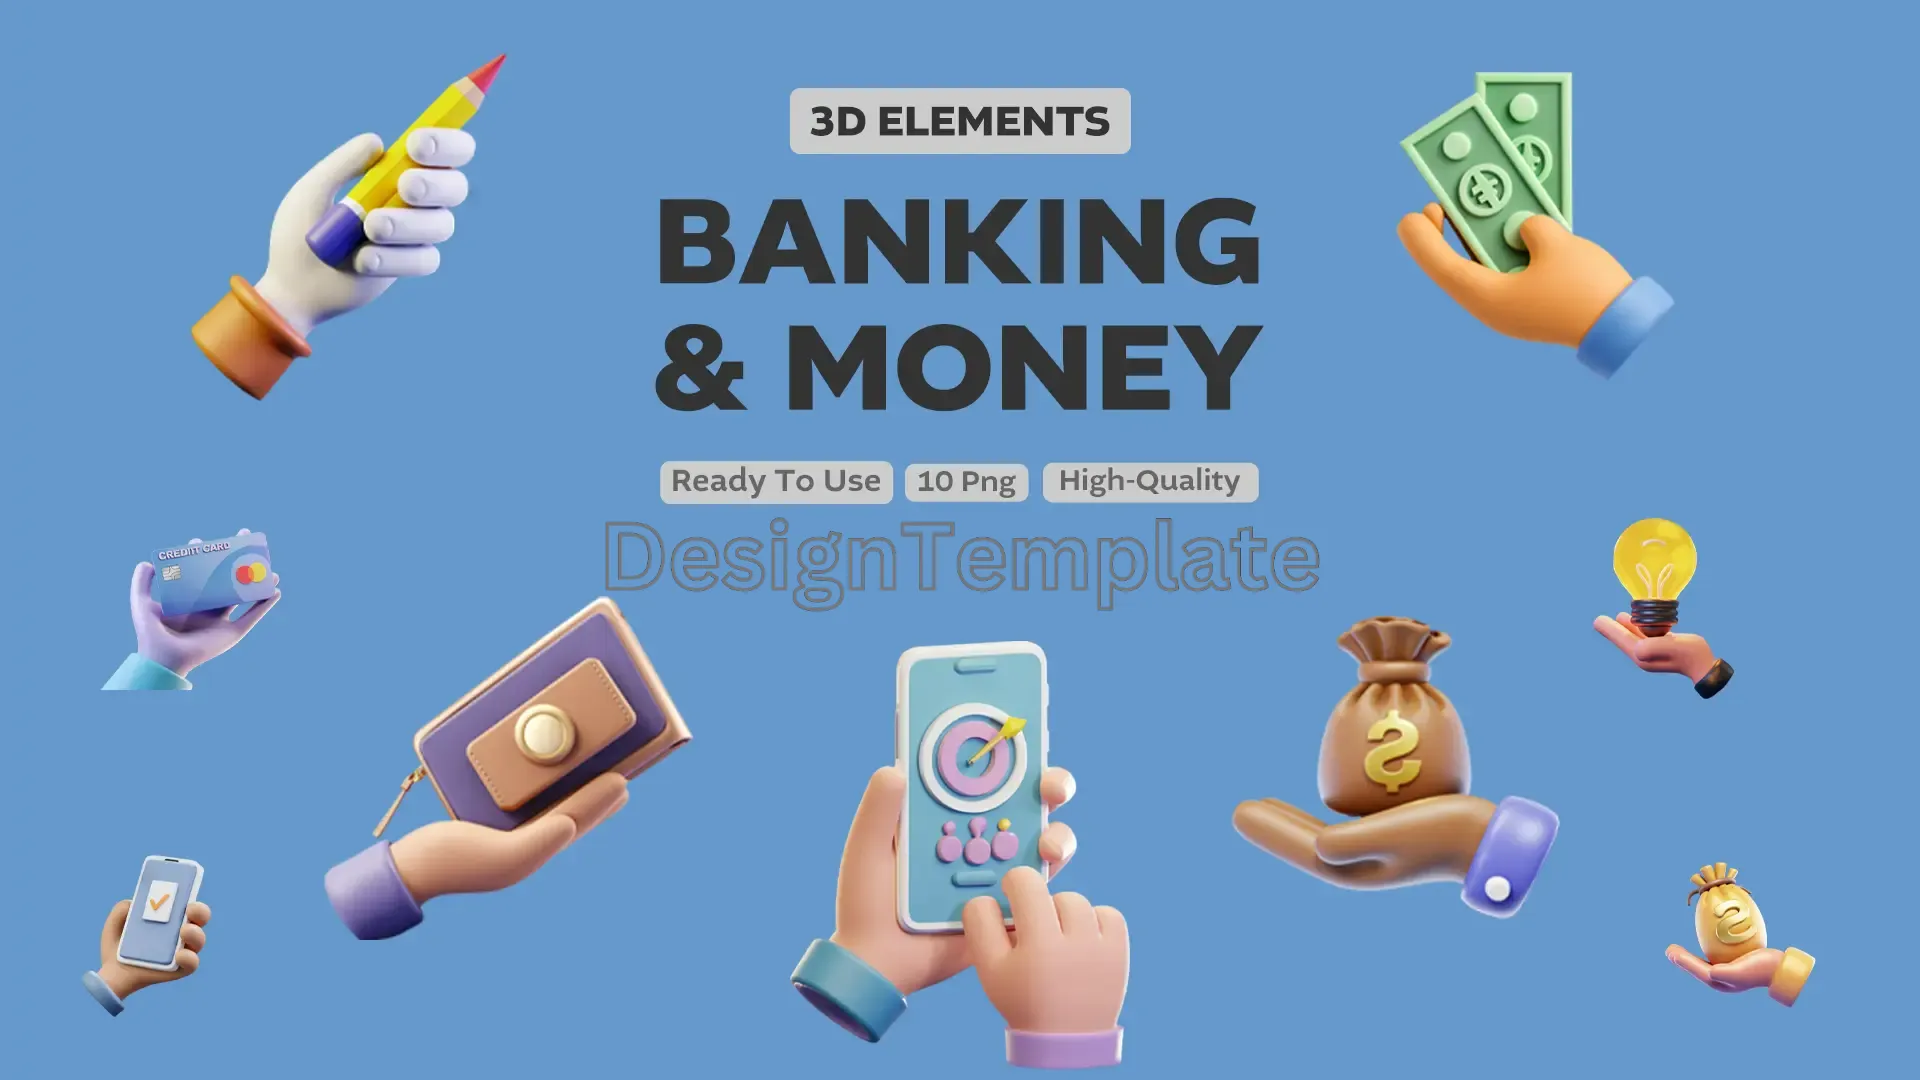 Fiscal Features Exquisite 3D Banking Elements